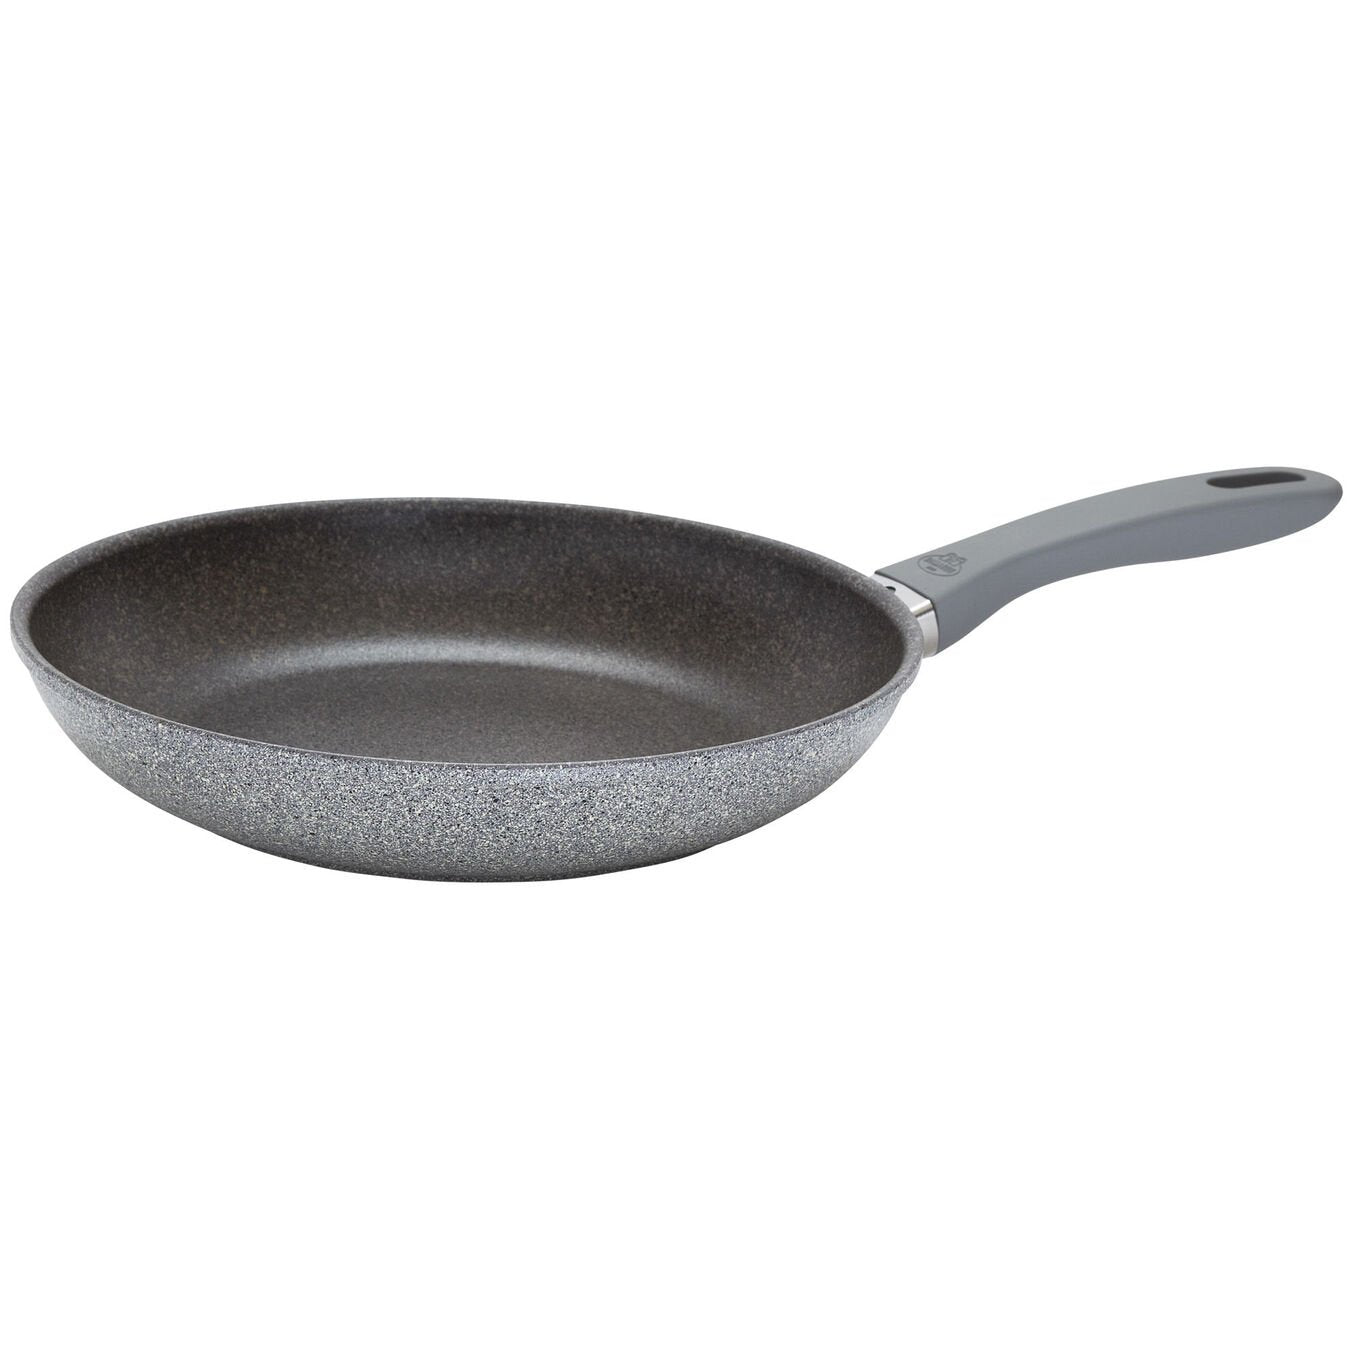 fry pan on white background